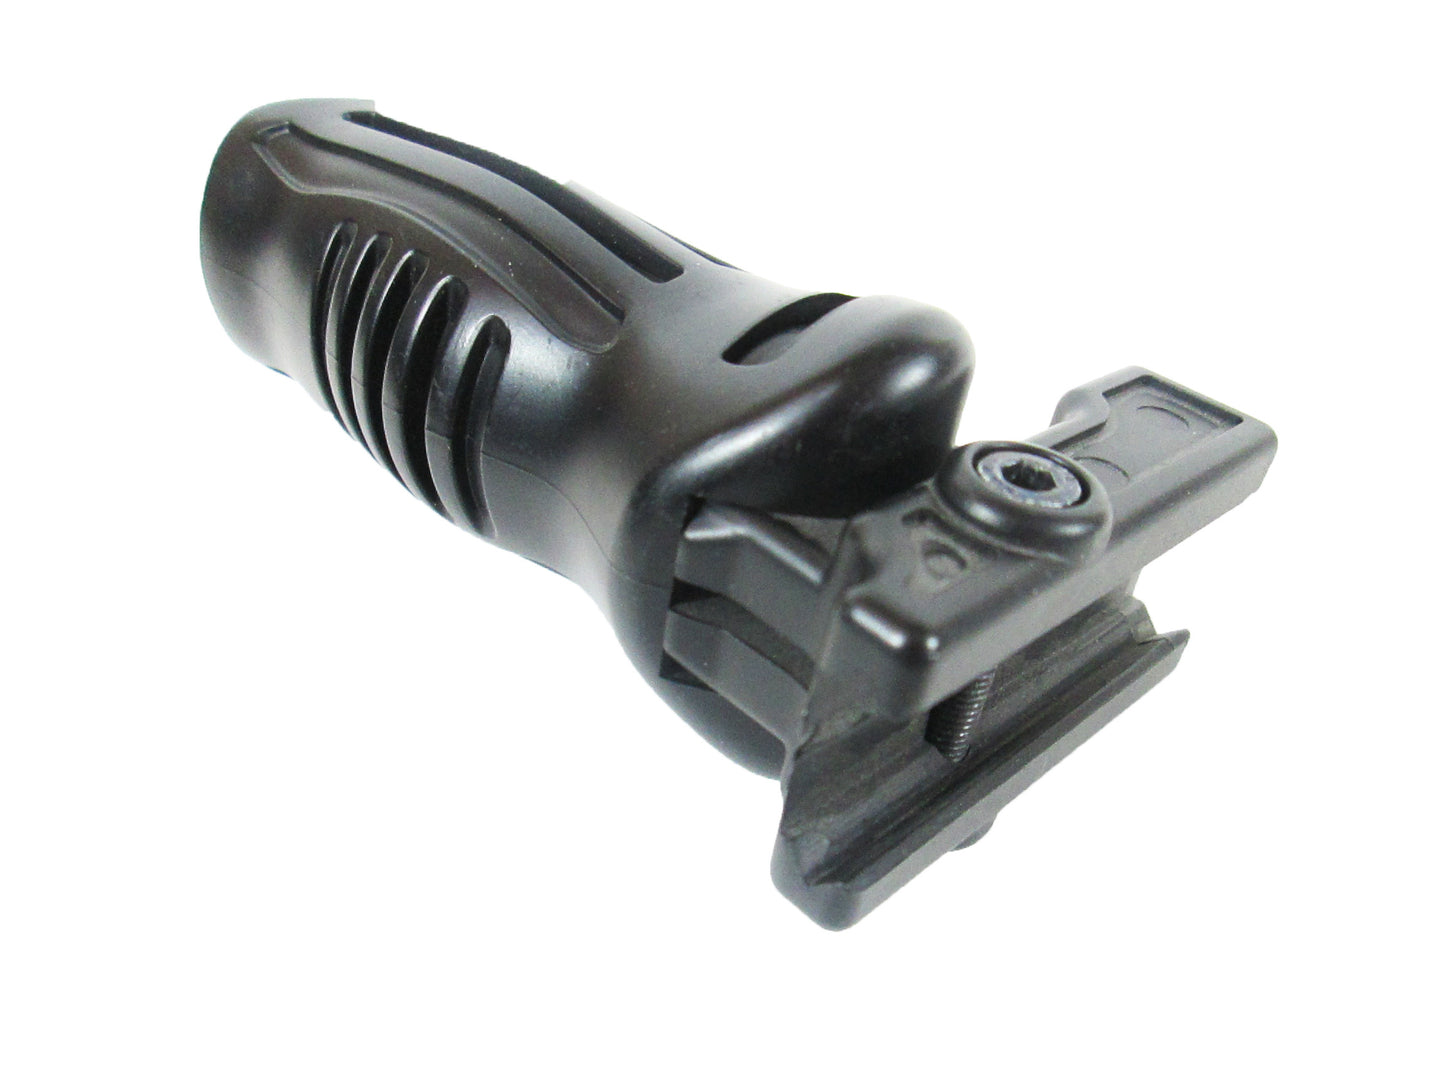 Contoured Universal 2 Position Foregrip Attachment